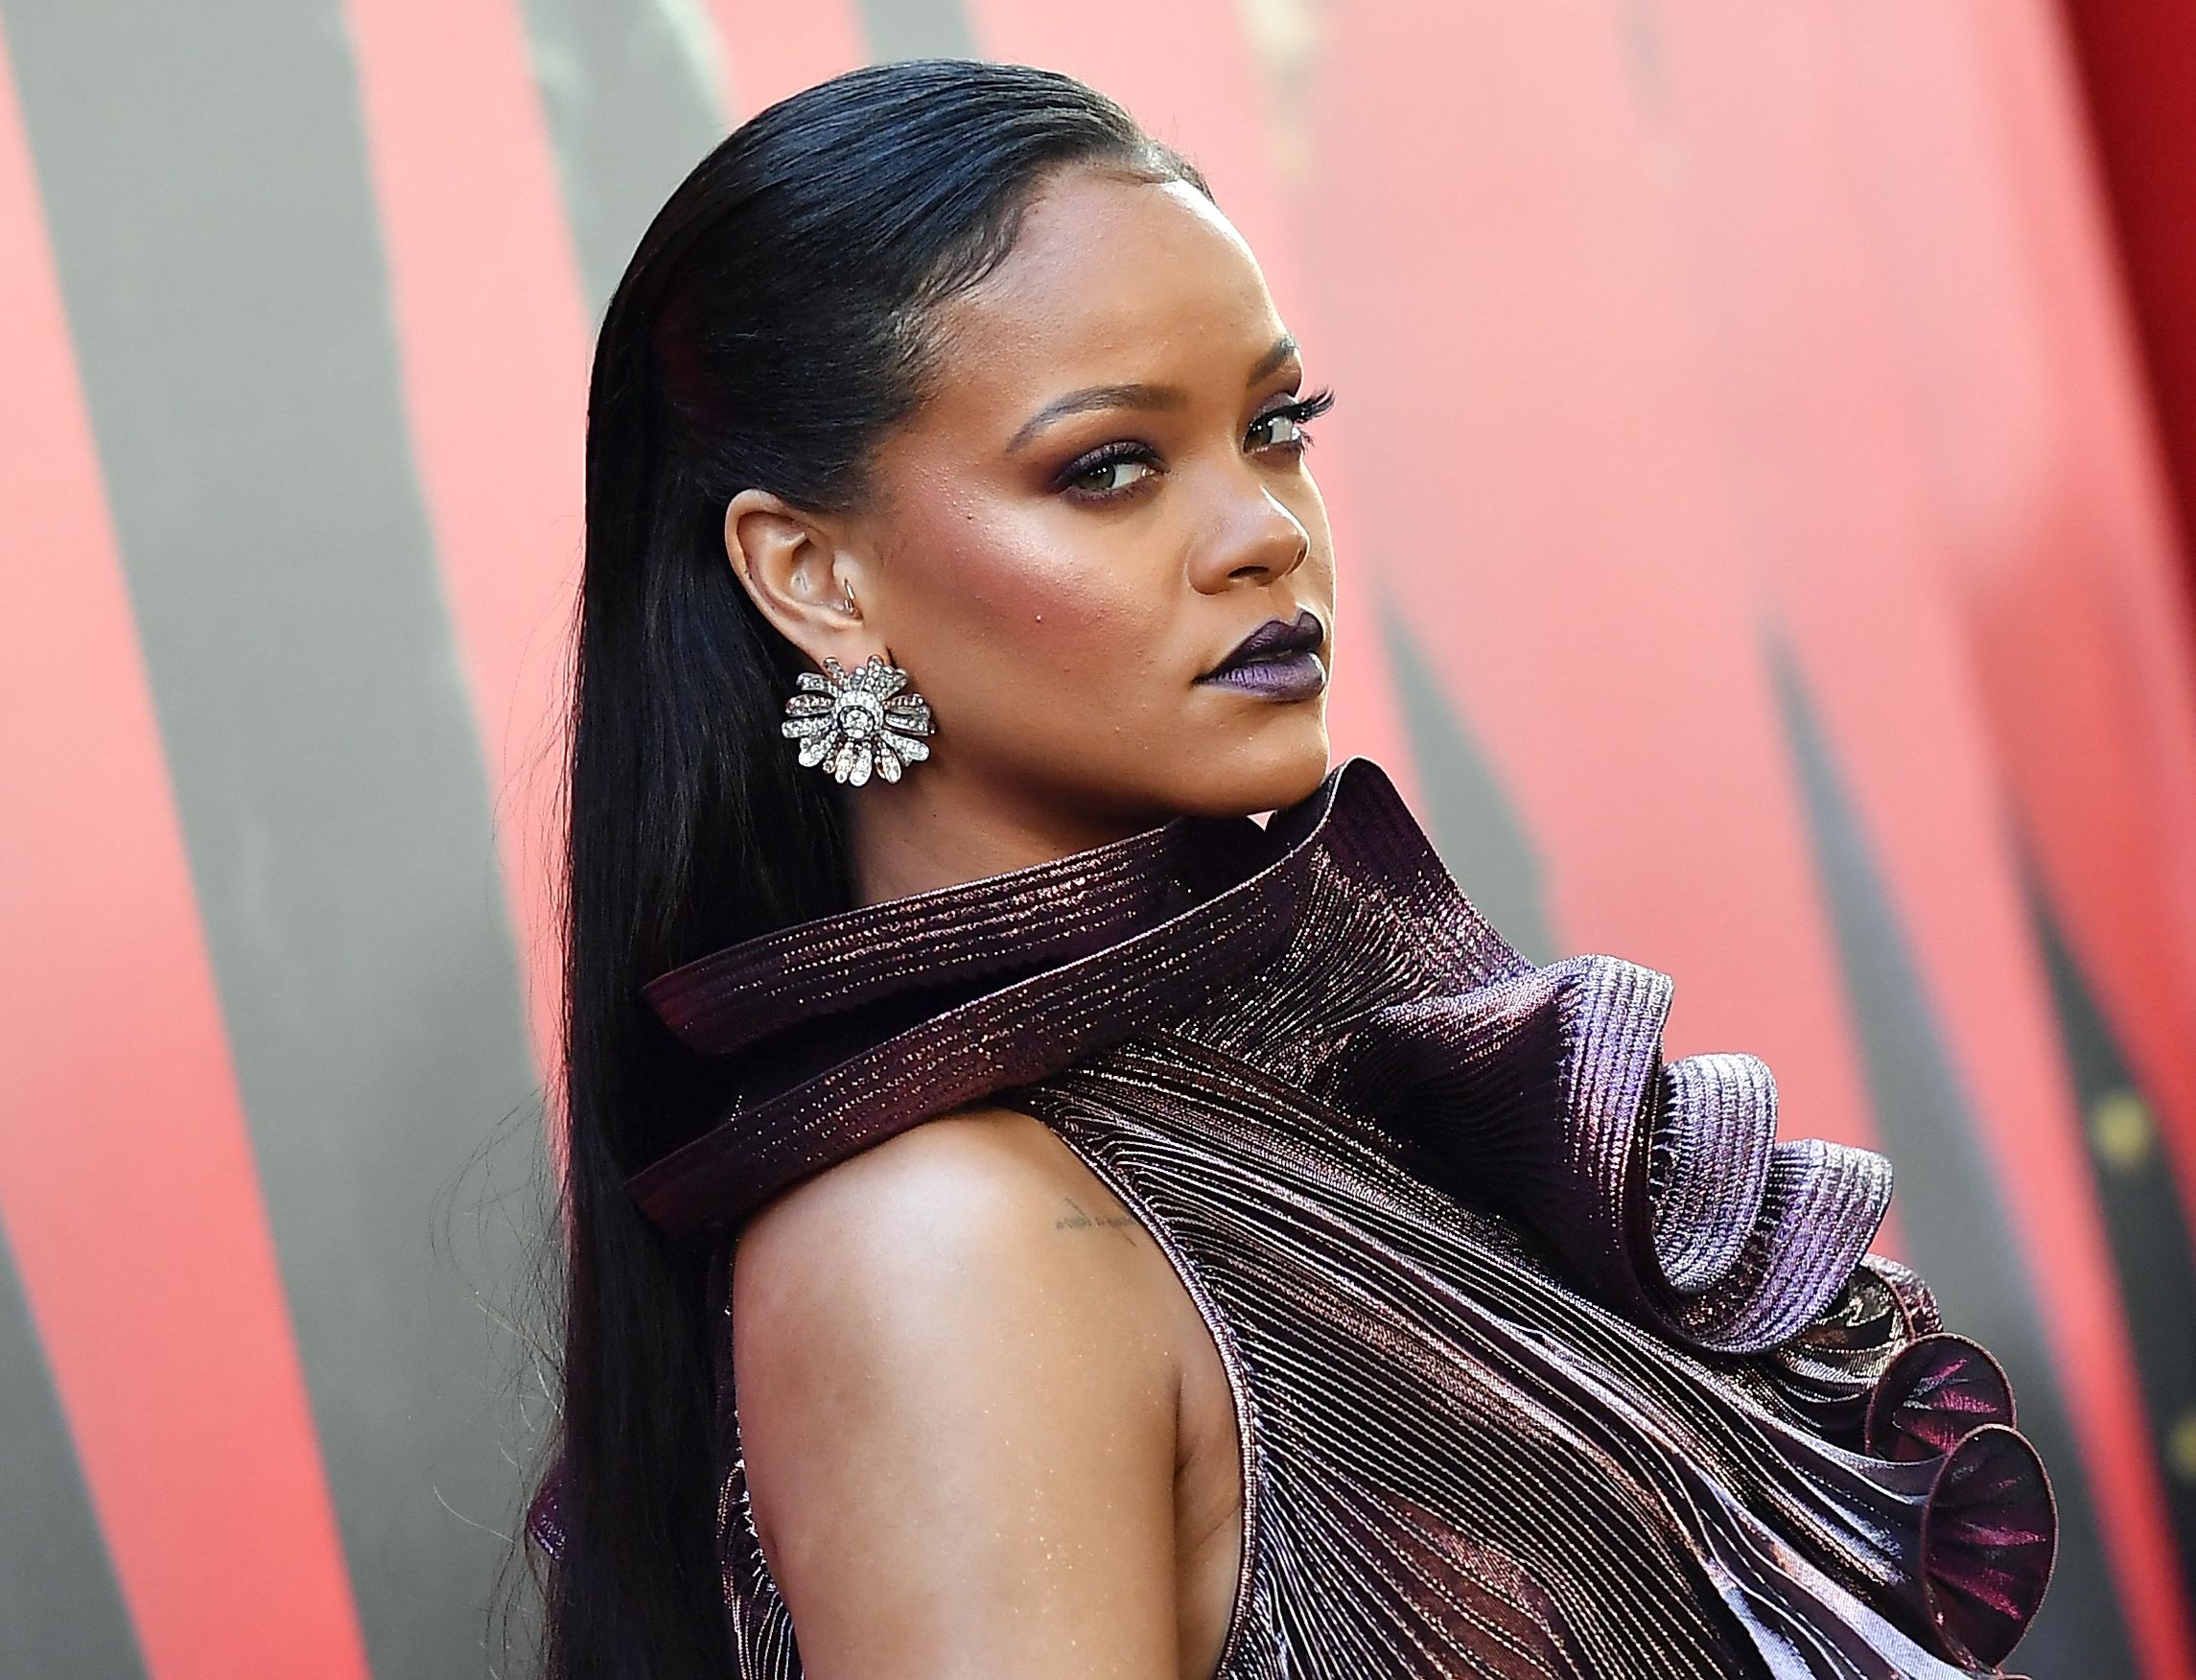 (FILES) In this file photo taken on June 5, 2018 Singer/actress Rihanna attends the World Premiere of OCEANS 8 in New York. - Singer and businesswoman Rihanna is worth a whopping $1.7 billion, Forbes said Wednesday, making her one of the richest woman musicians on the planet. (Photo by ANGELA WEISS / AFP)